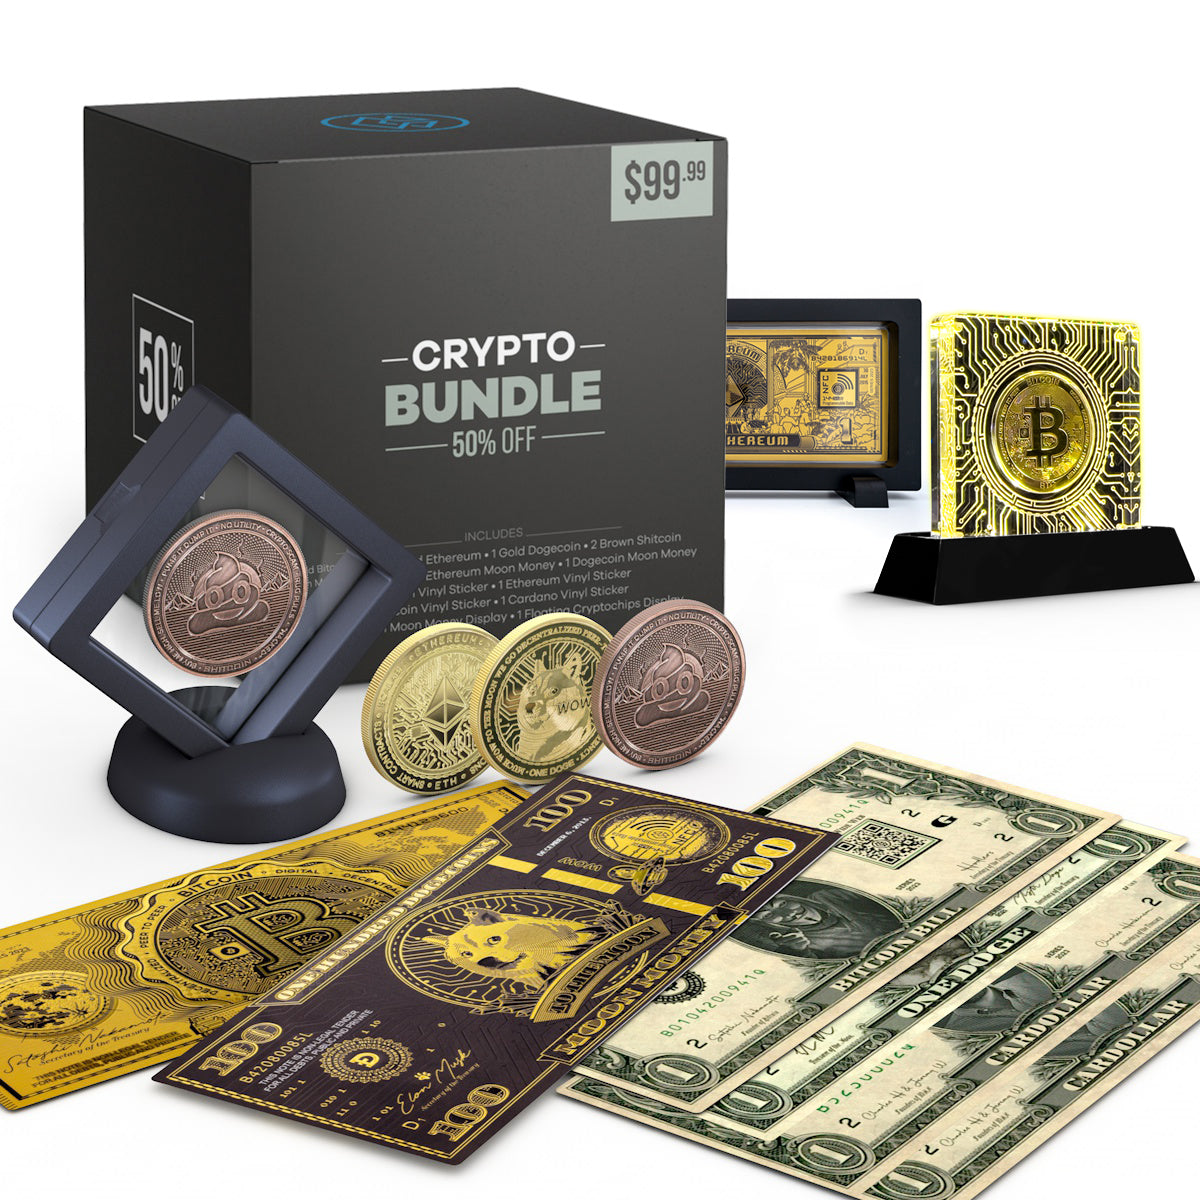 Cryptochips | Crypto Bundle Physical Crypto Coin. Collectable cryptocurrency merch you can hodl